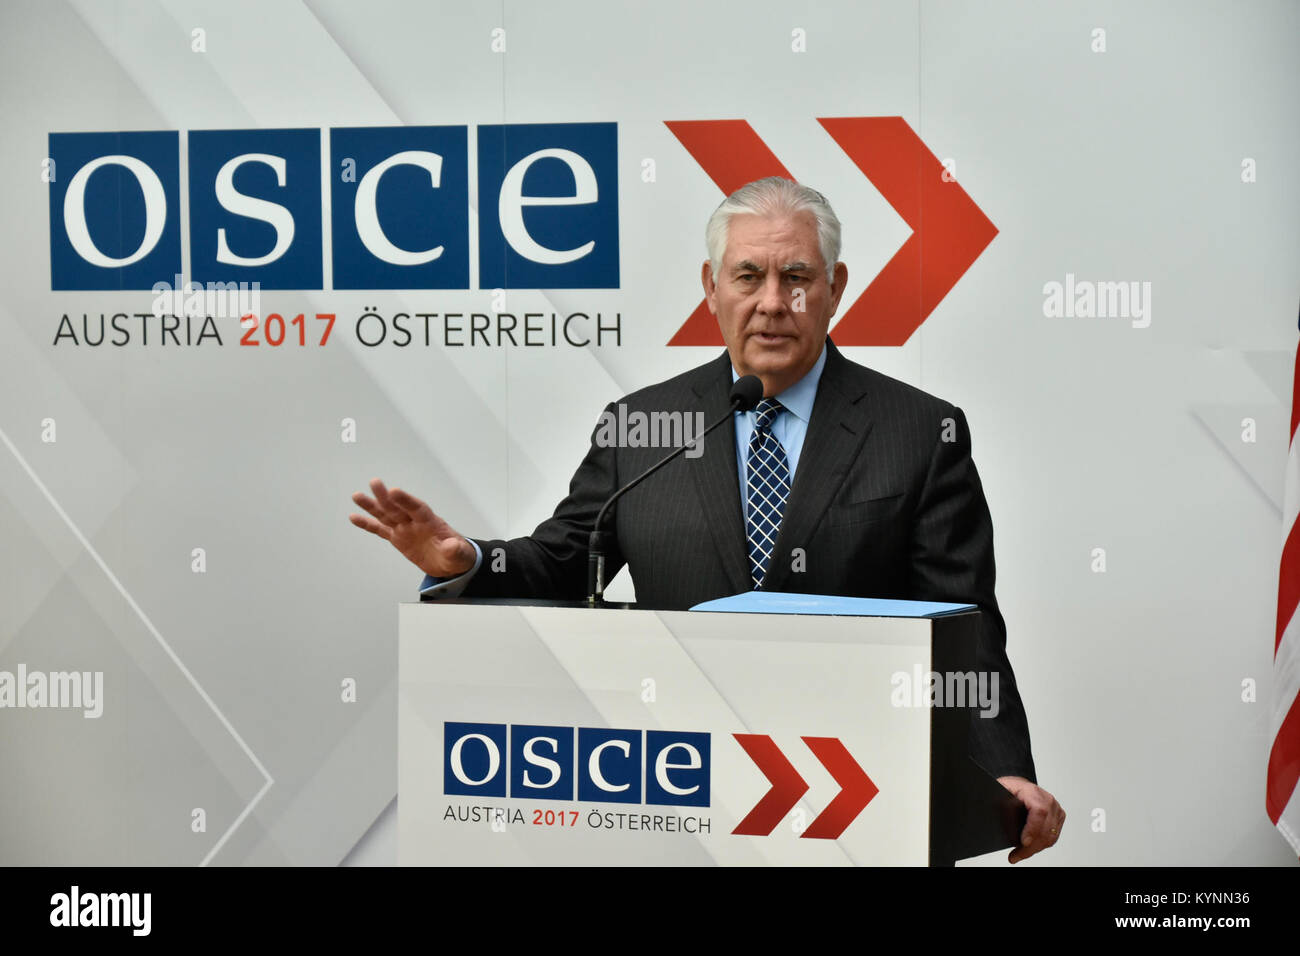 U.S. Secretary of State Rex Tillerson addresses the media at the 2017 Organization for Security and Co-operation in Europe  (OSCE) Ministerial Council in Vienna, Austria onDecember 7, 2017. Stock Photo